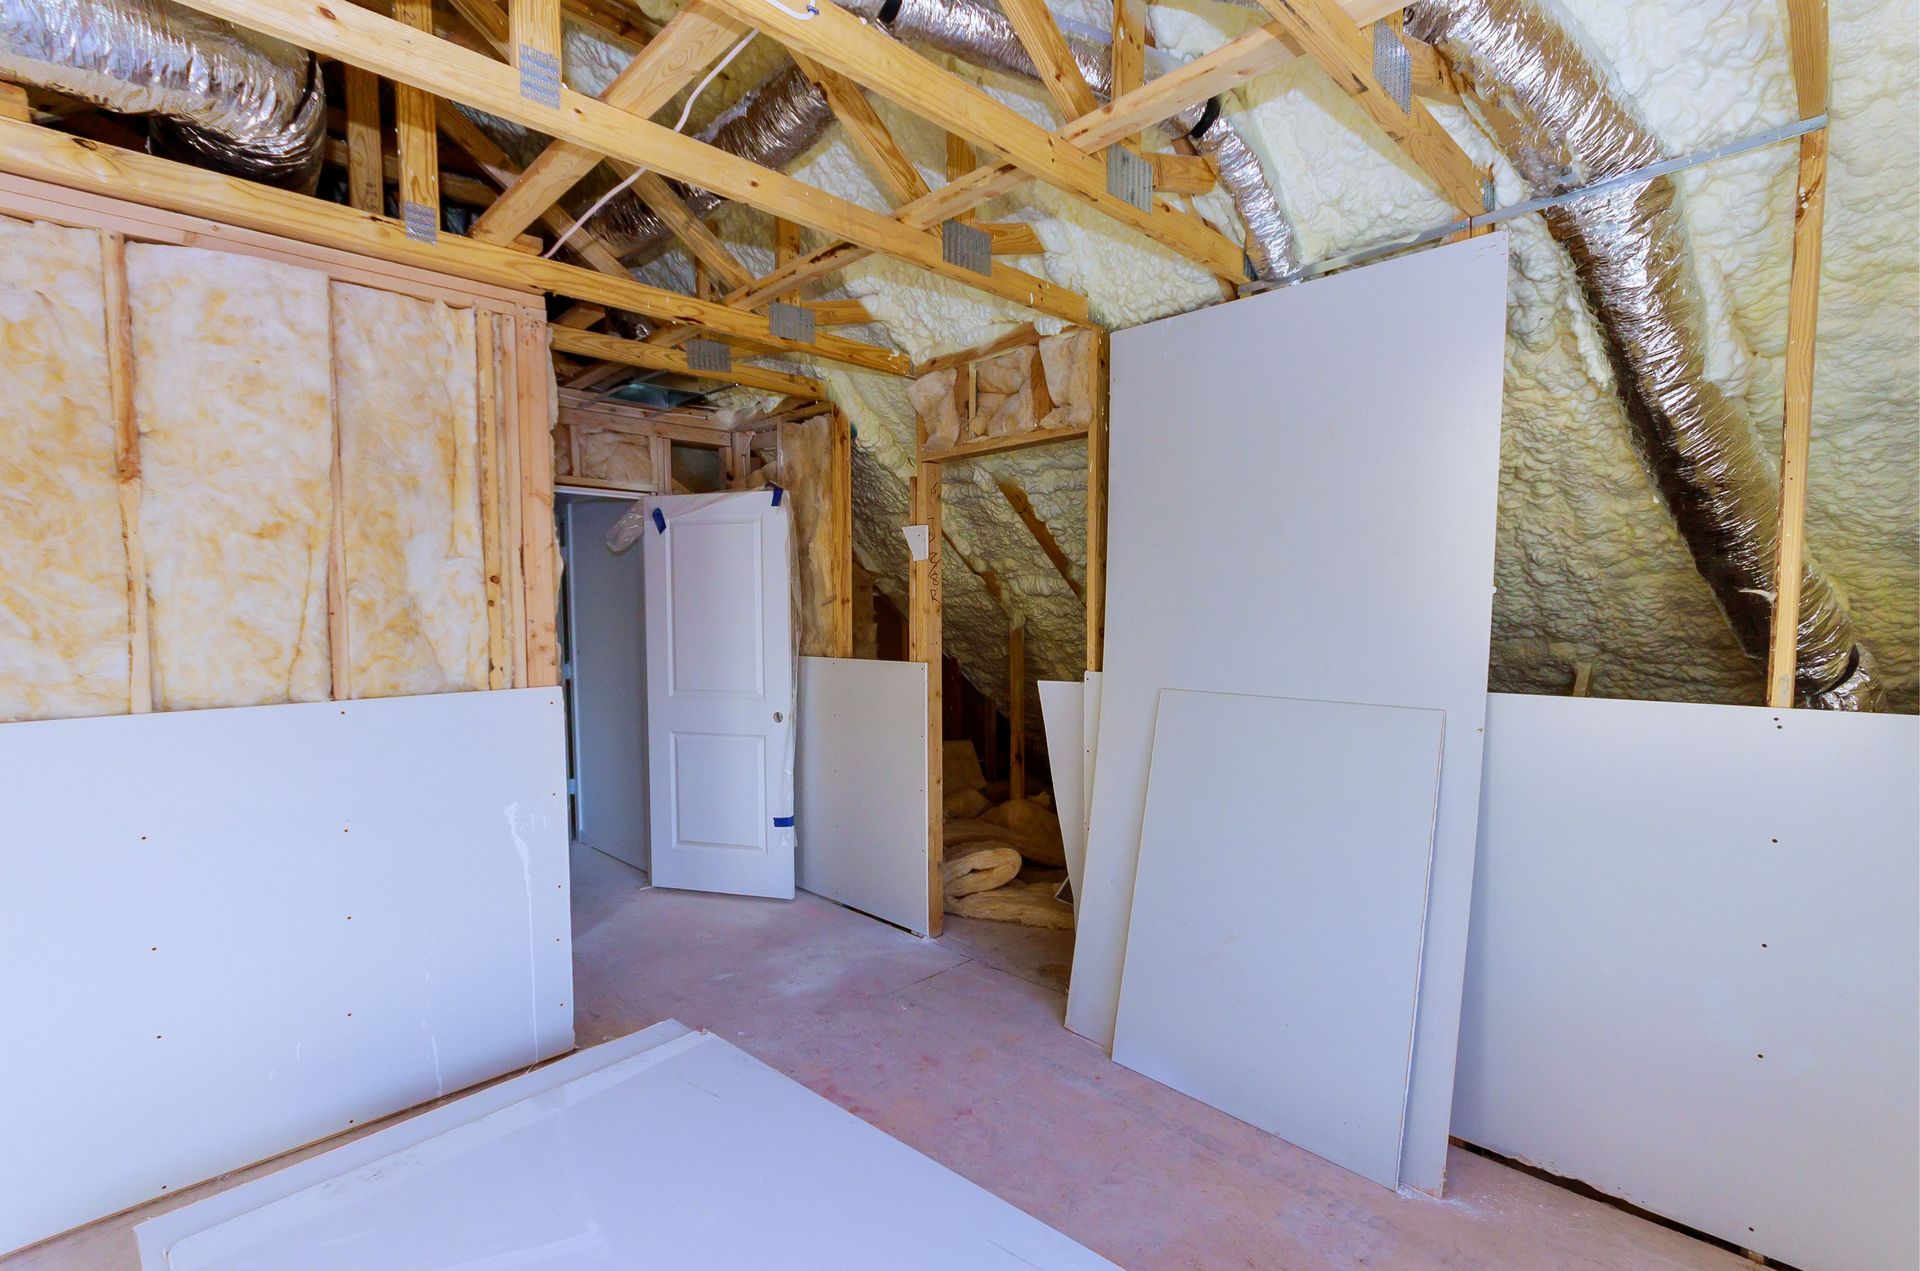 A room in a house under construction with a lot of drywall.